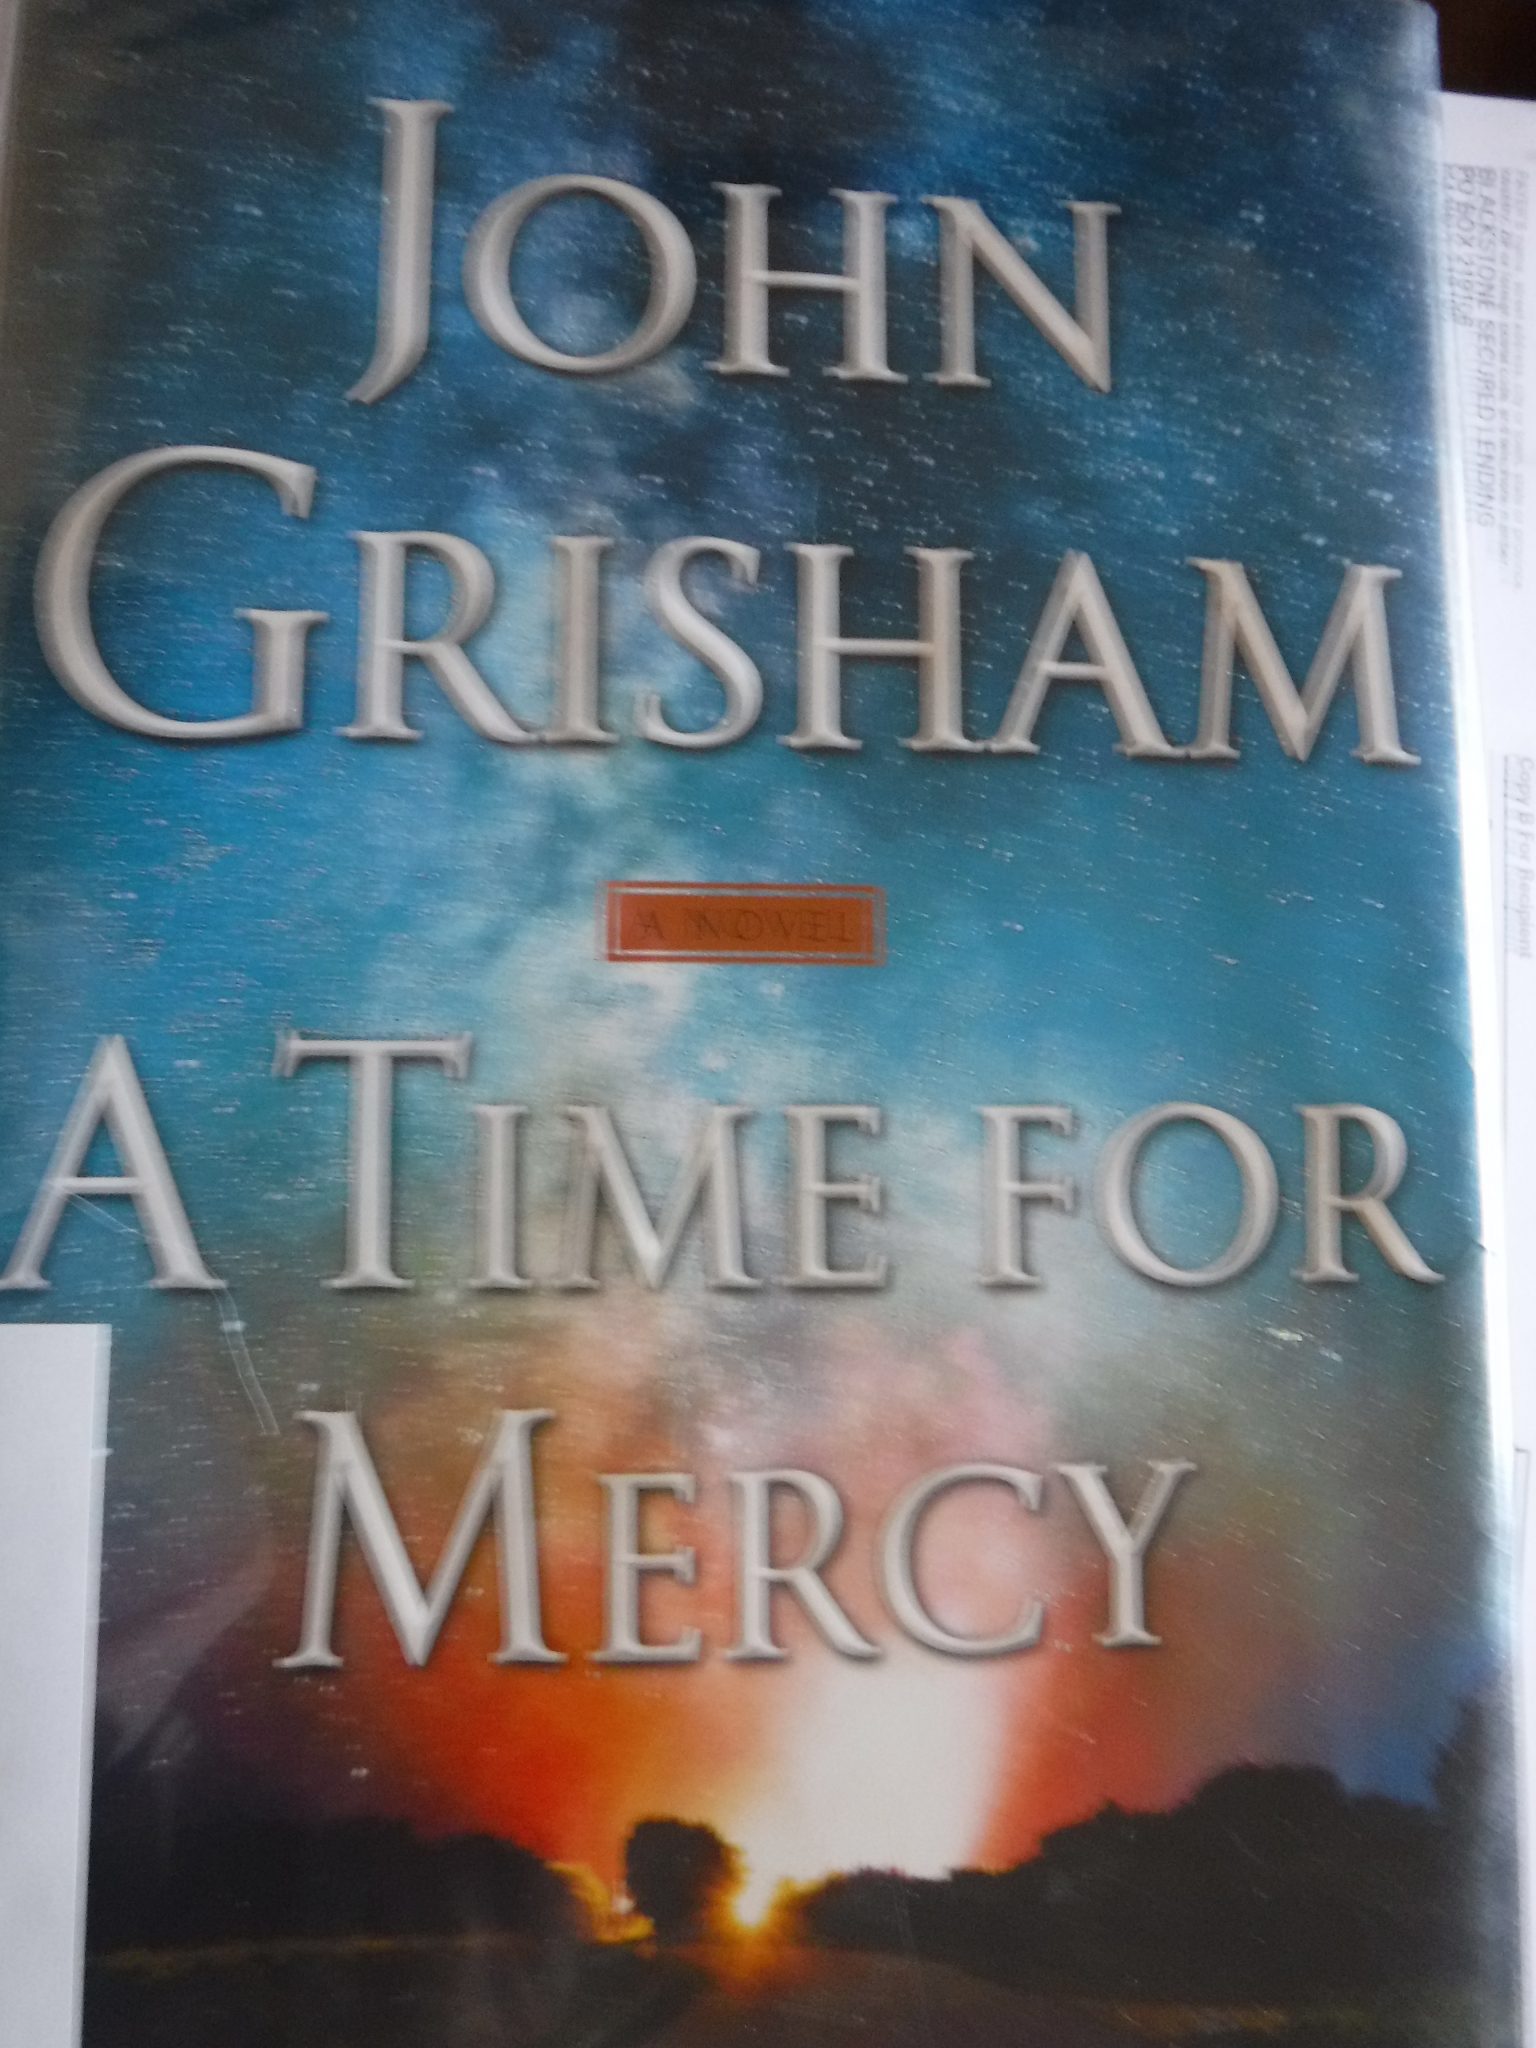 a time for mercy grisham review